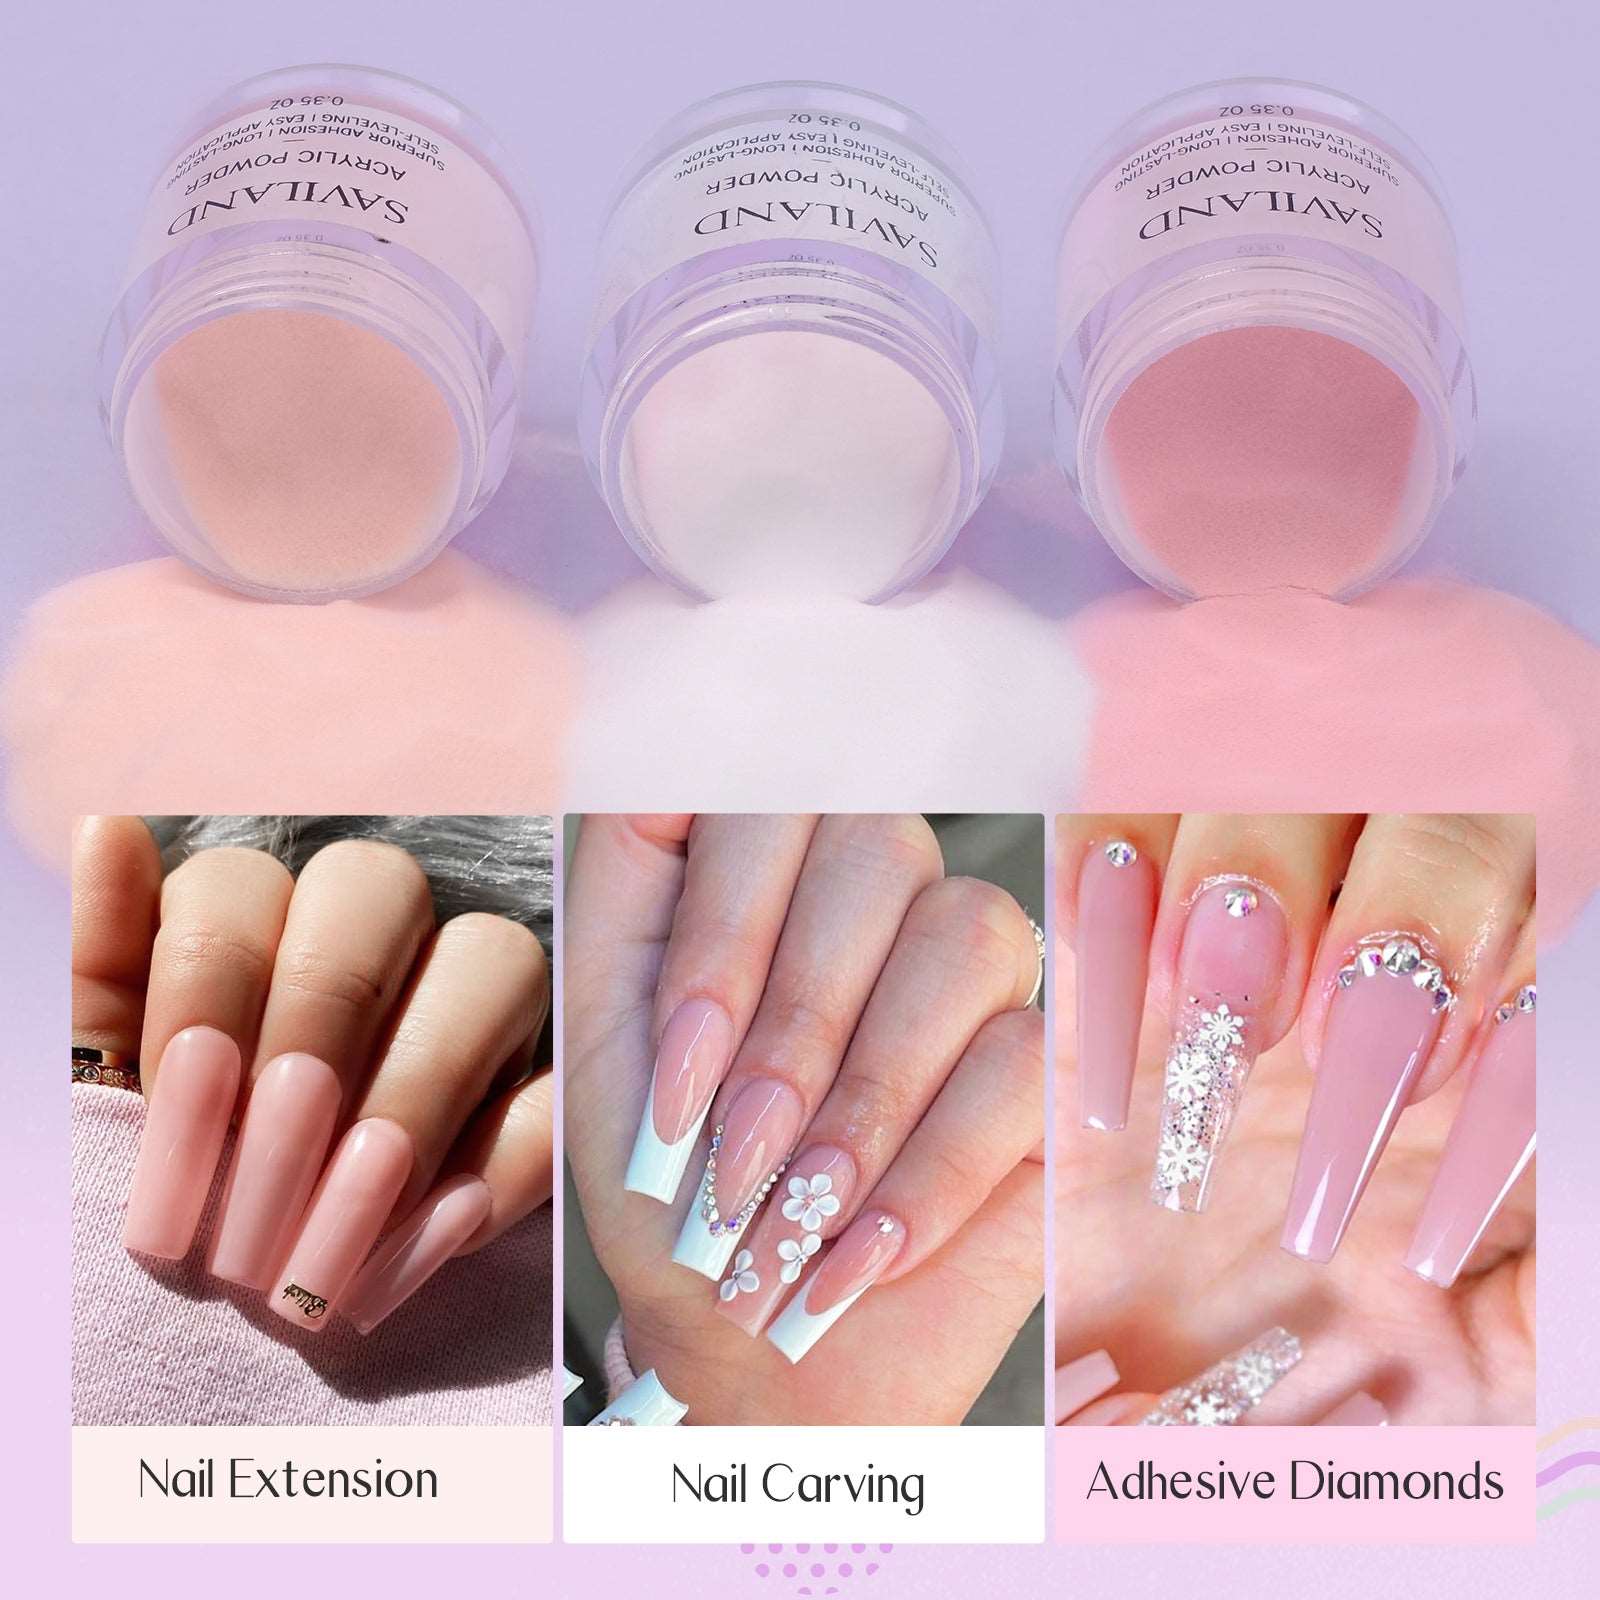  Saviland Acrylic Powder Set Grows in The Dark Acrylic Nail  Powder Set 10 Luminous Polymer Nails Powder for Natural Nails Carving  French Nail Extension, Fall, Halloween Nail Art, Gift for Women 